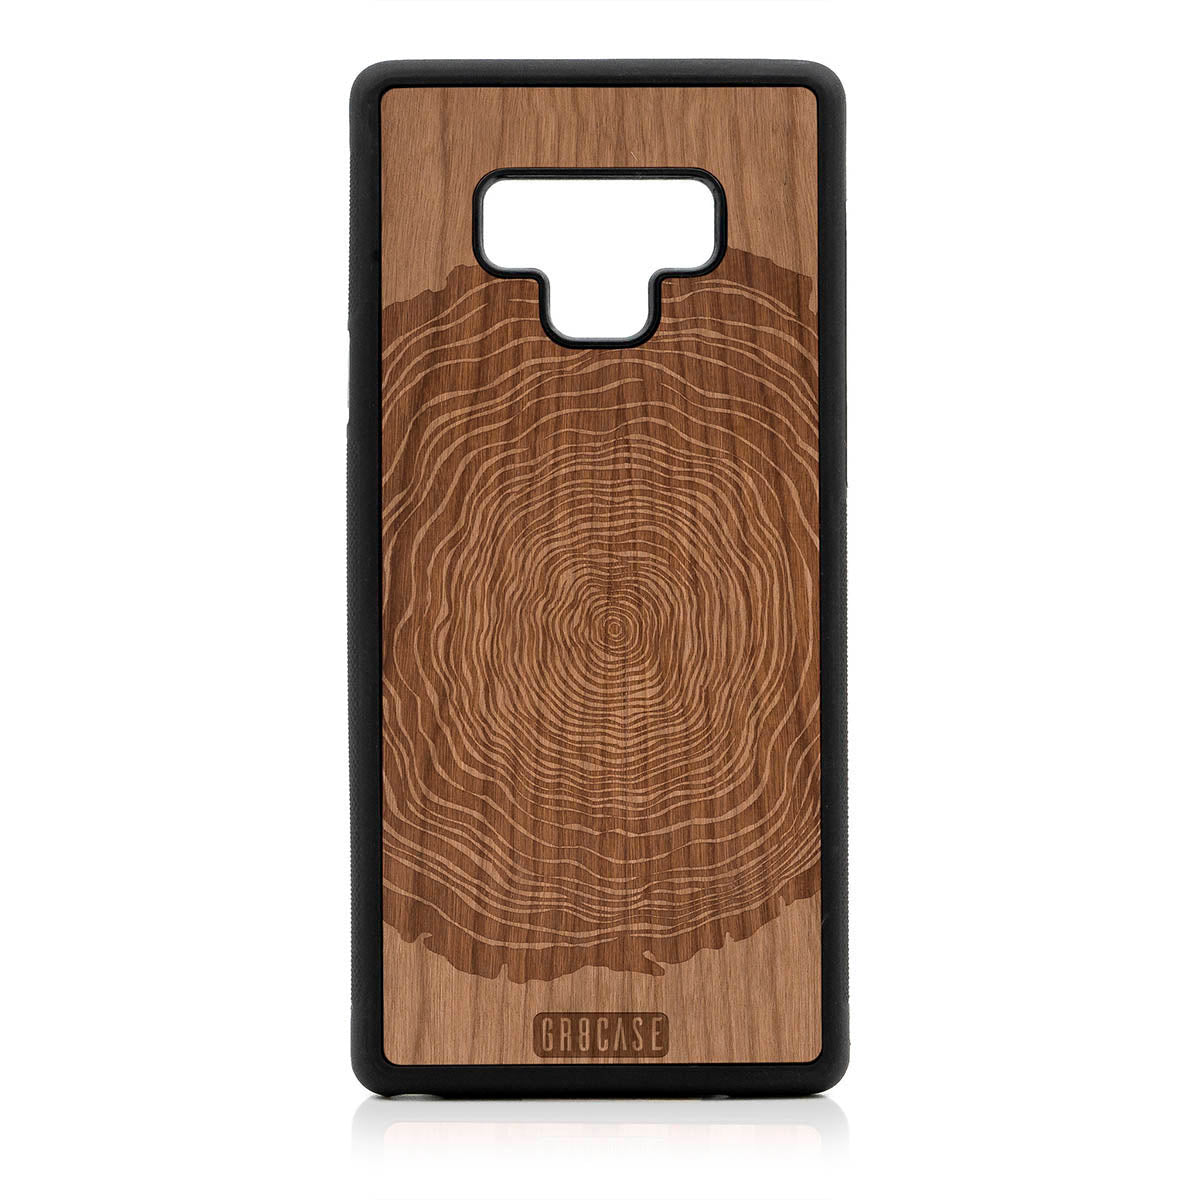 Tree Rings Design Wood Case For Samsung Galaxy Note 9